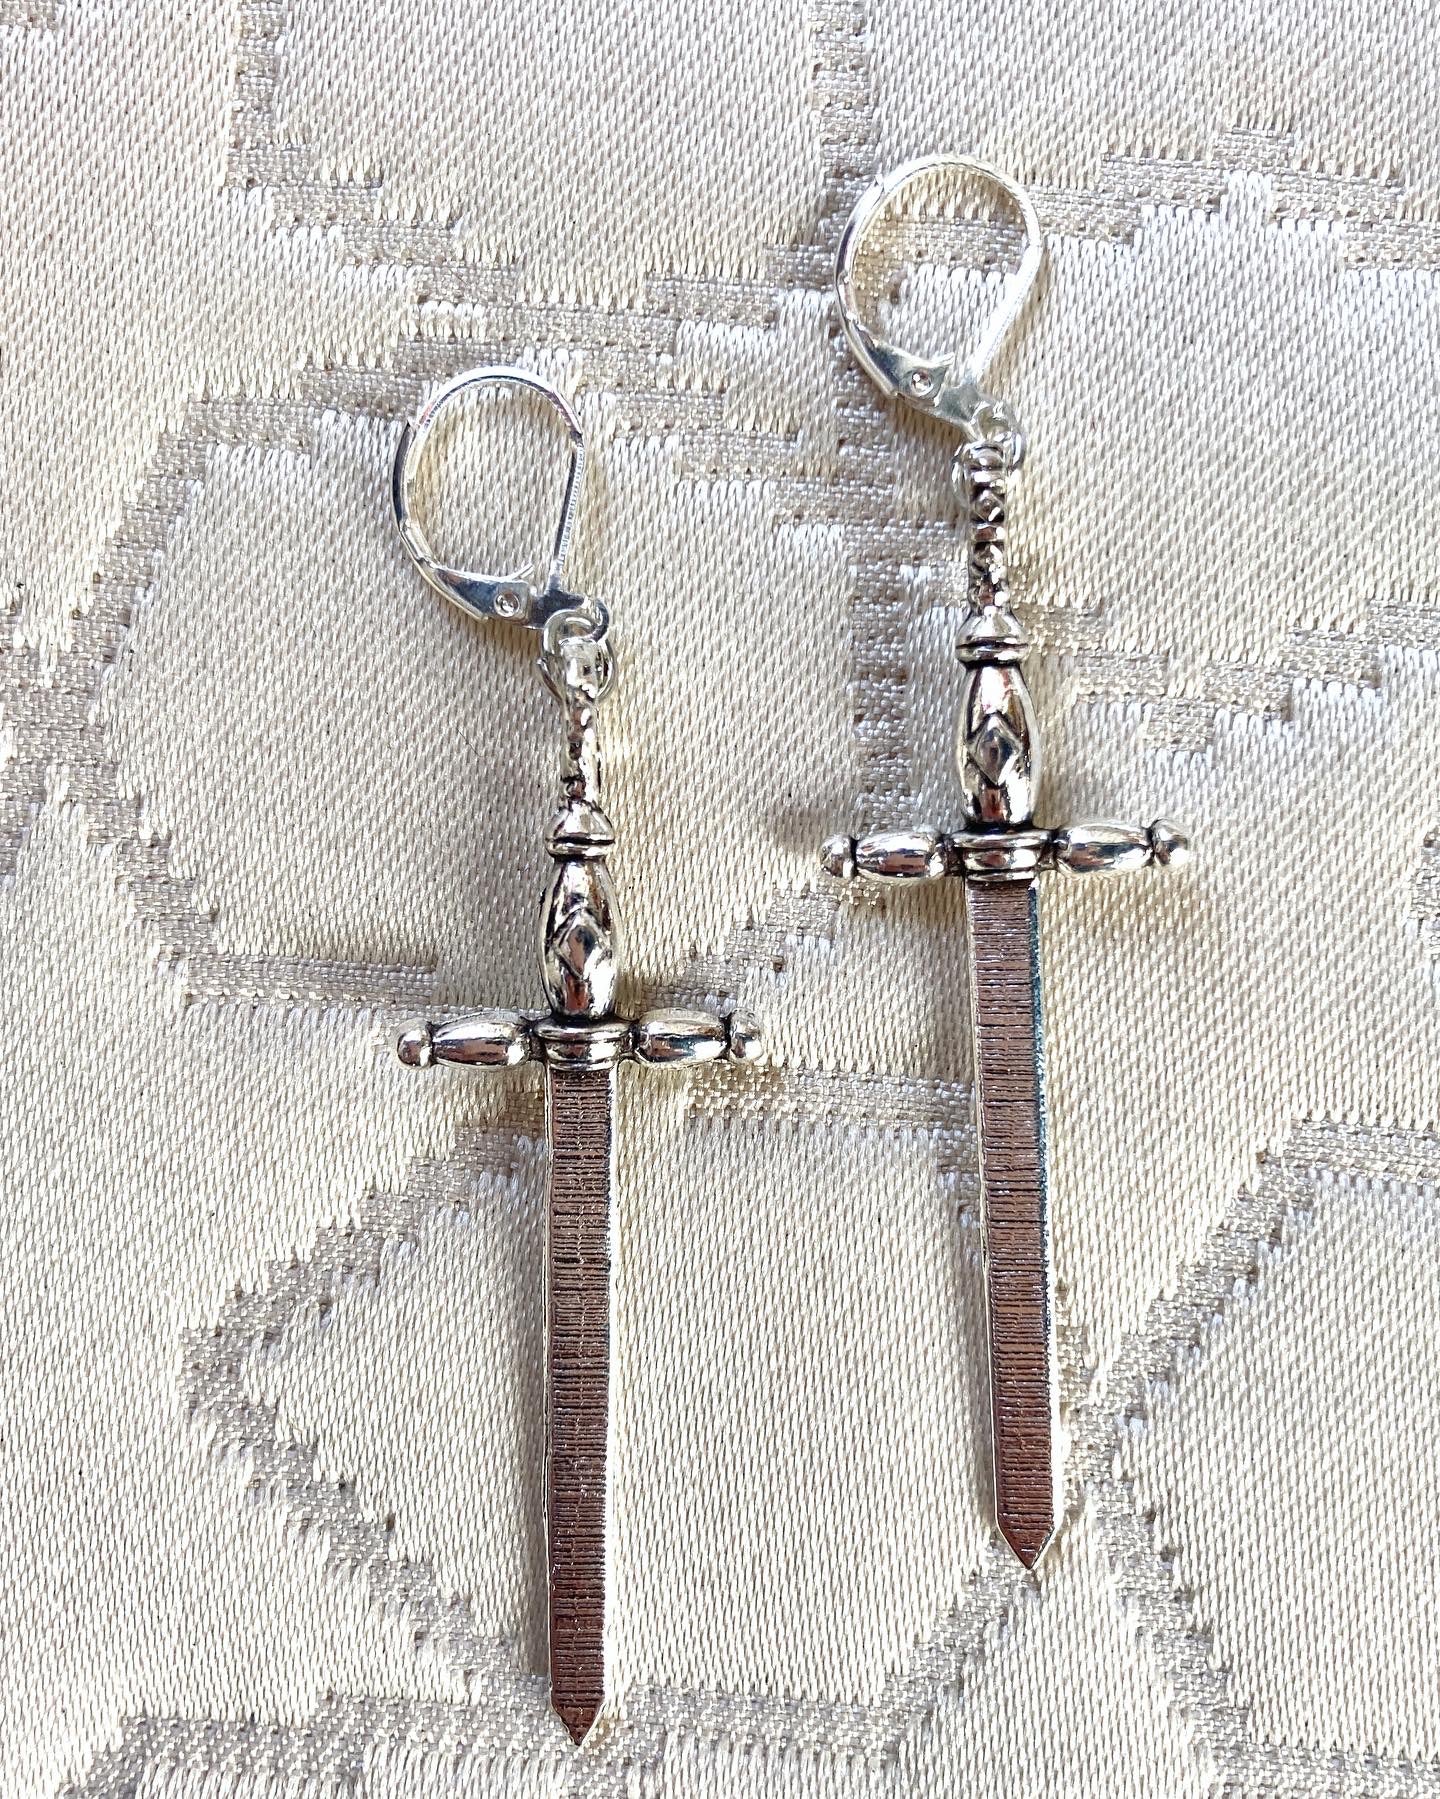 TINY DAGGER Earrings! Tiny weapons for your ears!